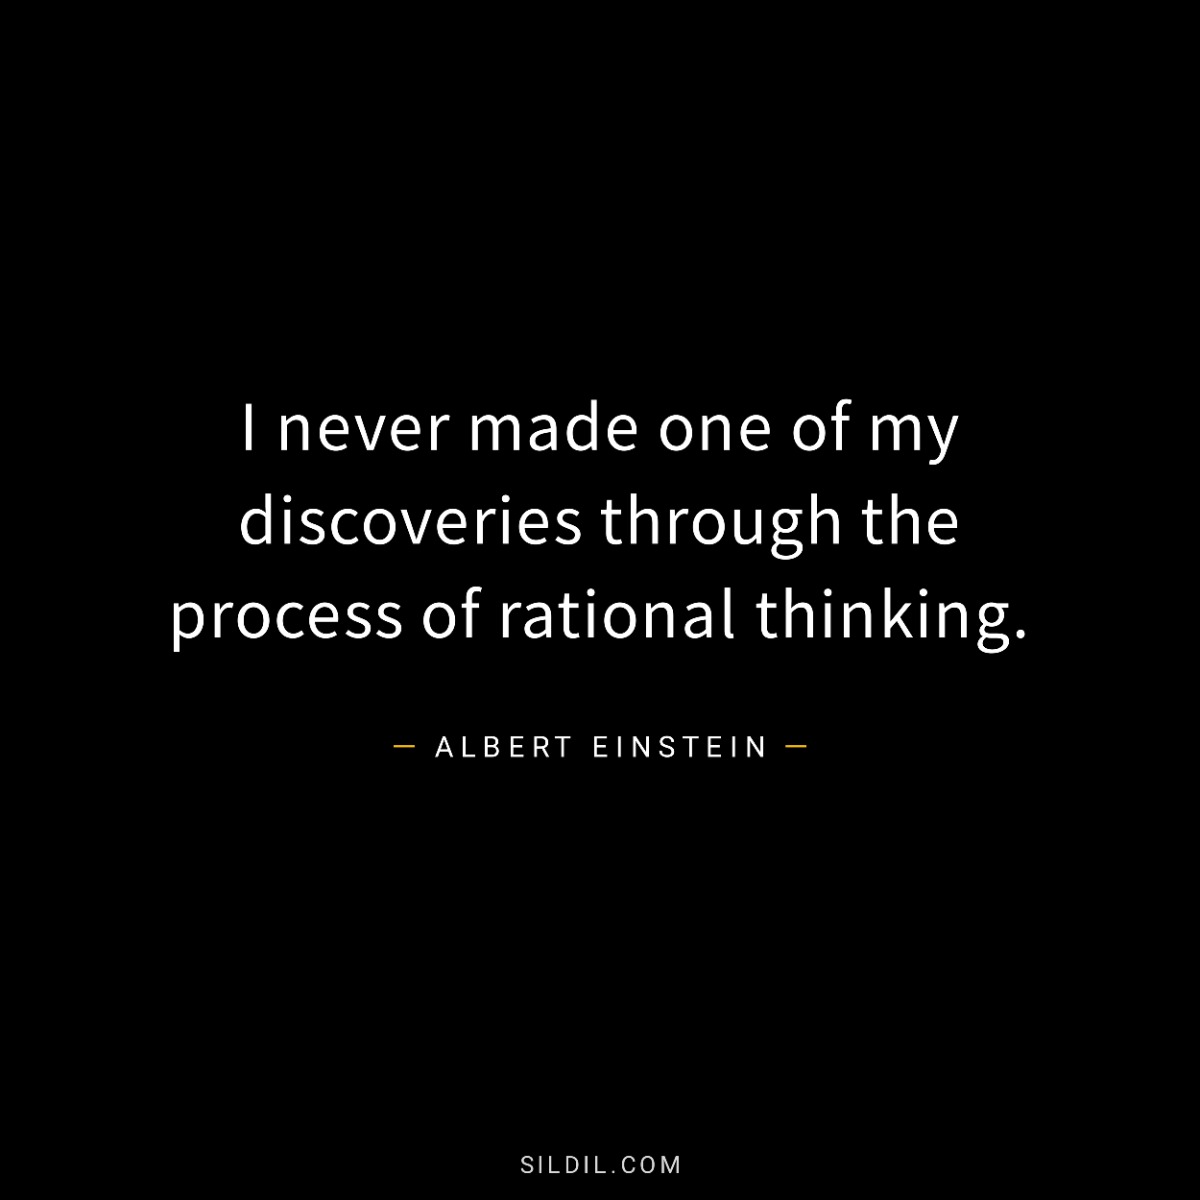 I never made one of my discoveries through the process of rational thinking.